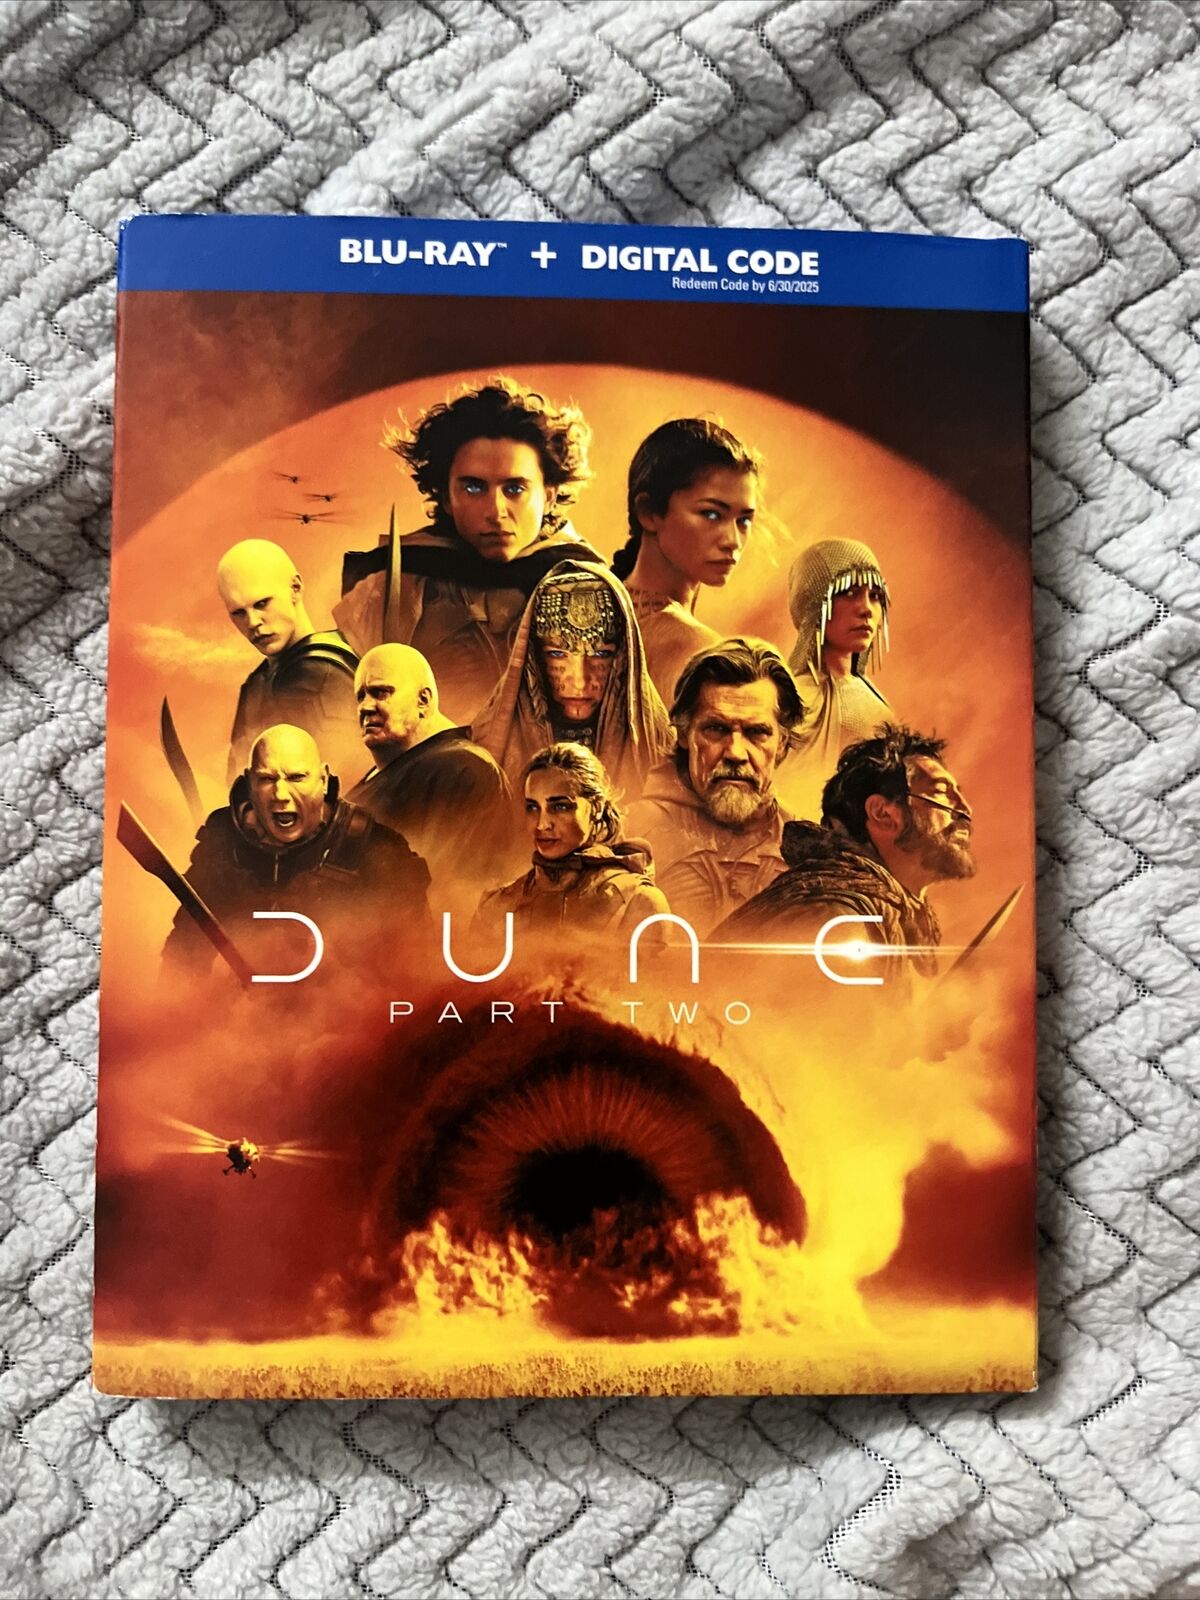 Dune Part Two Blu-ray + Digital BRAND NEW SEALED